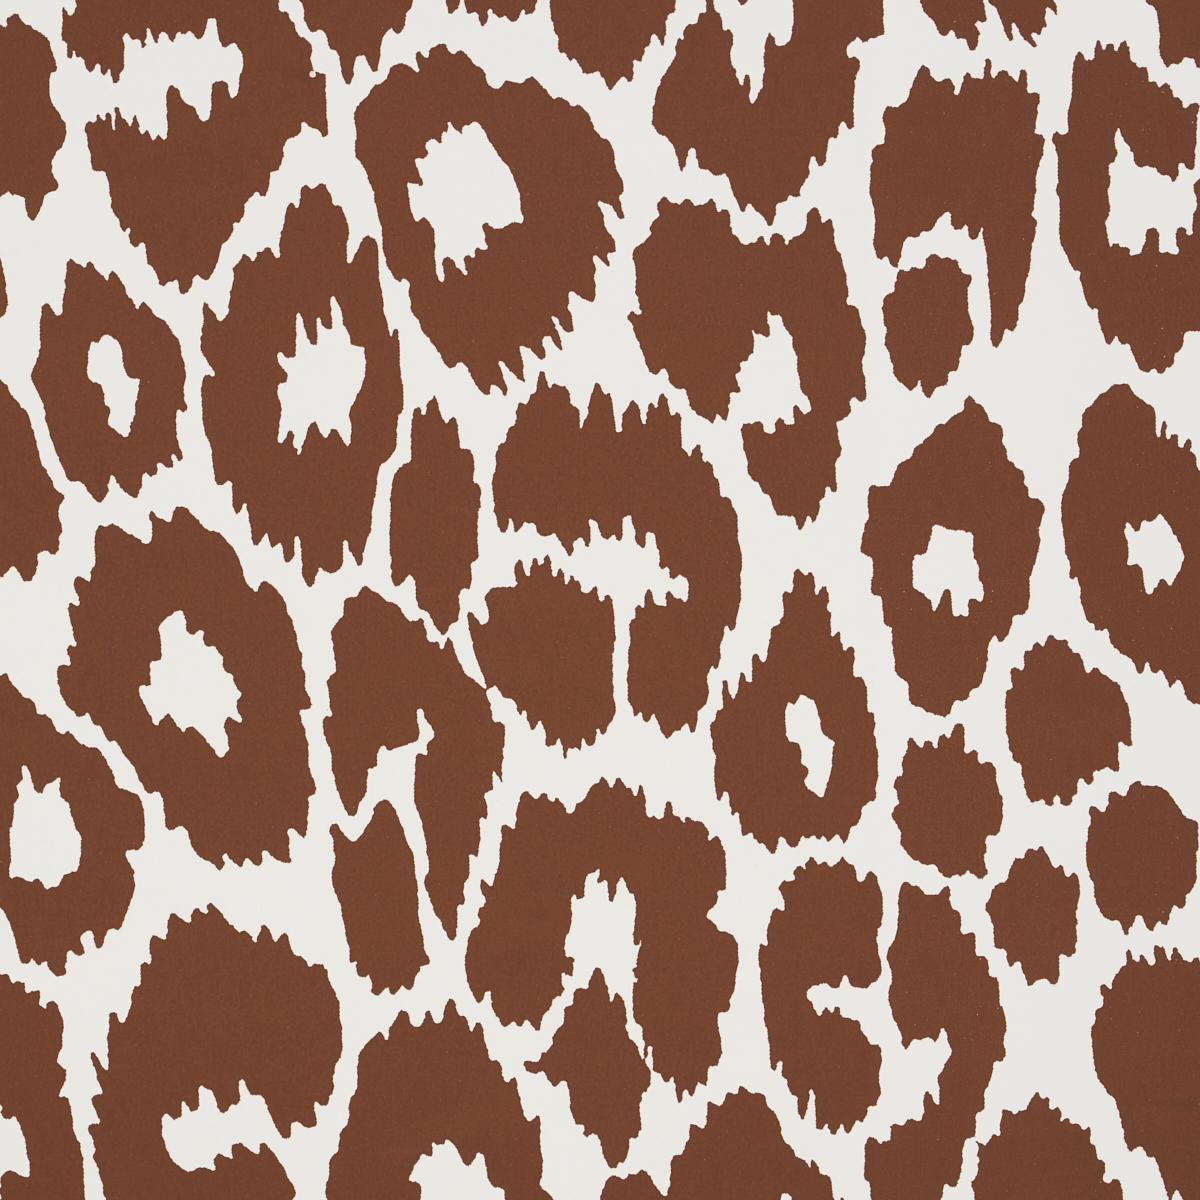 ICONIC LEOPARD_BROWN